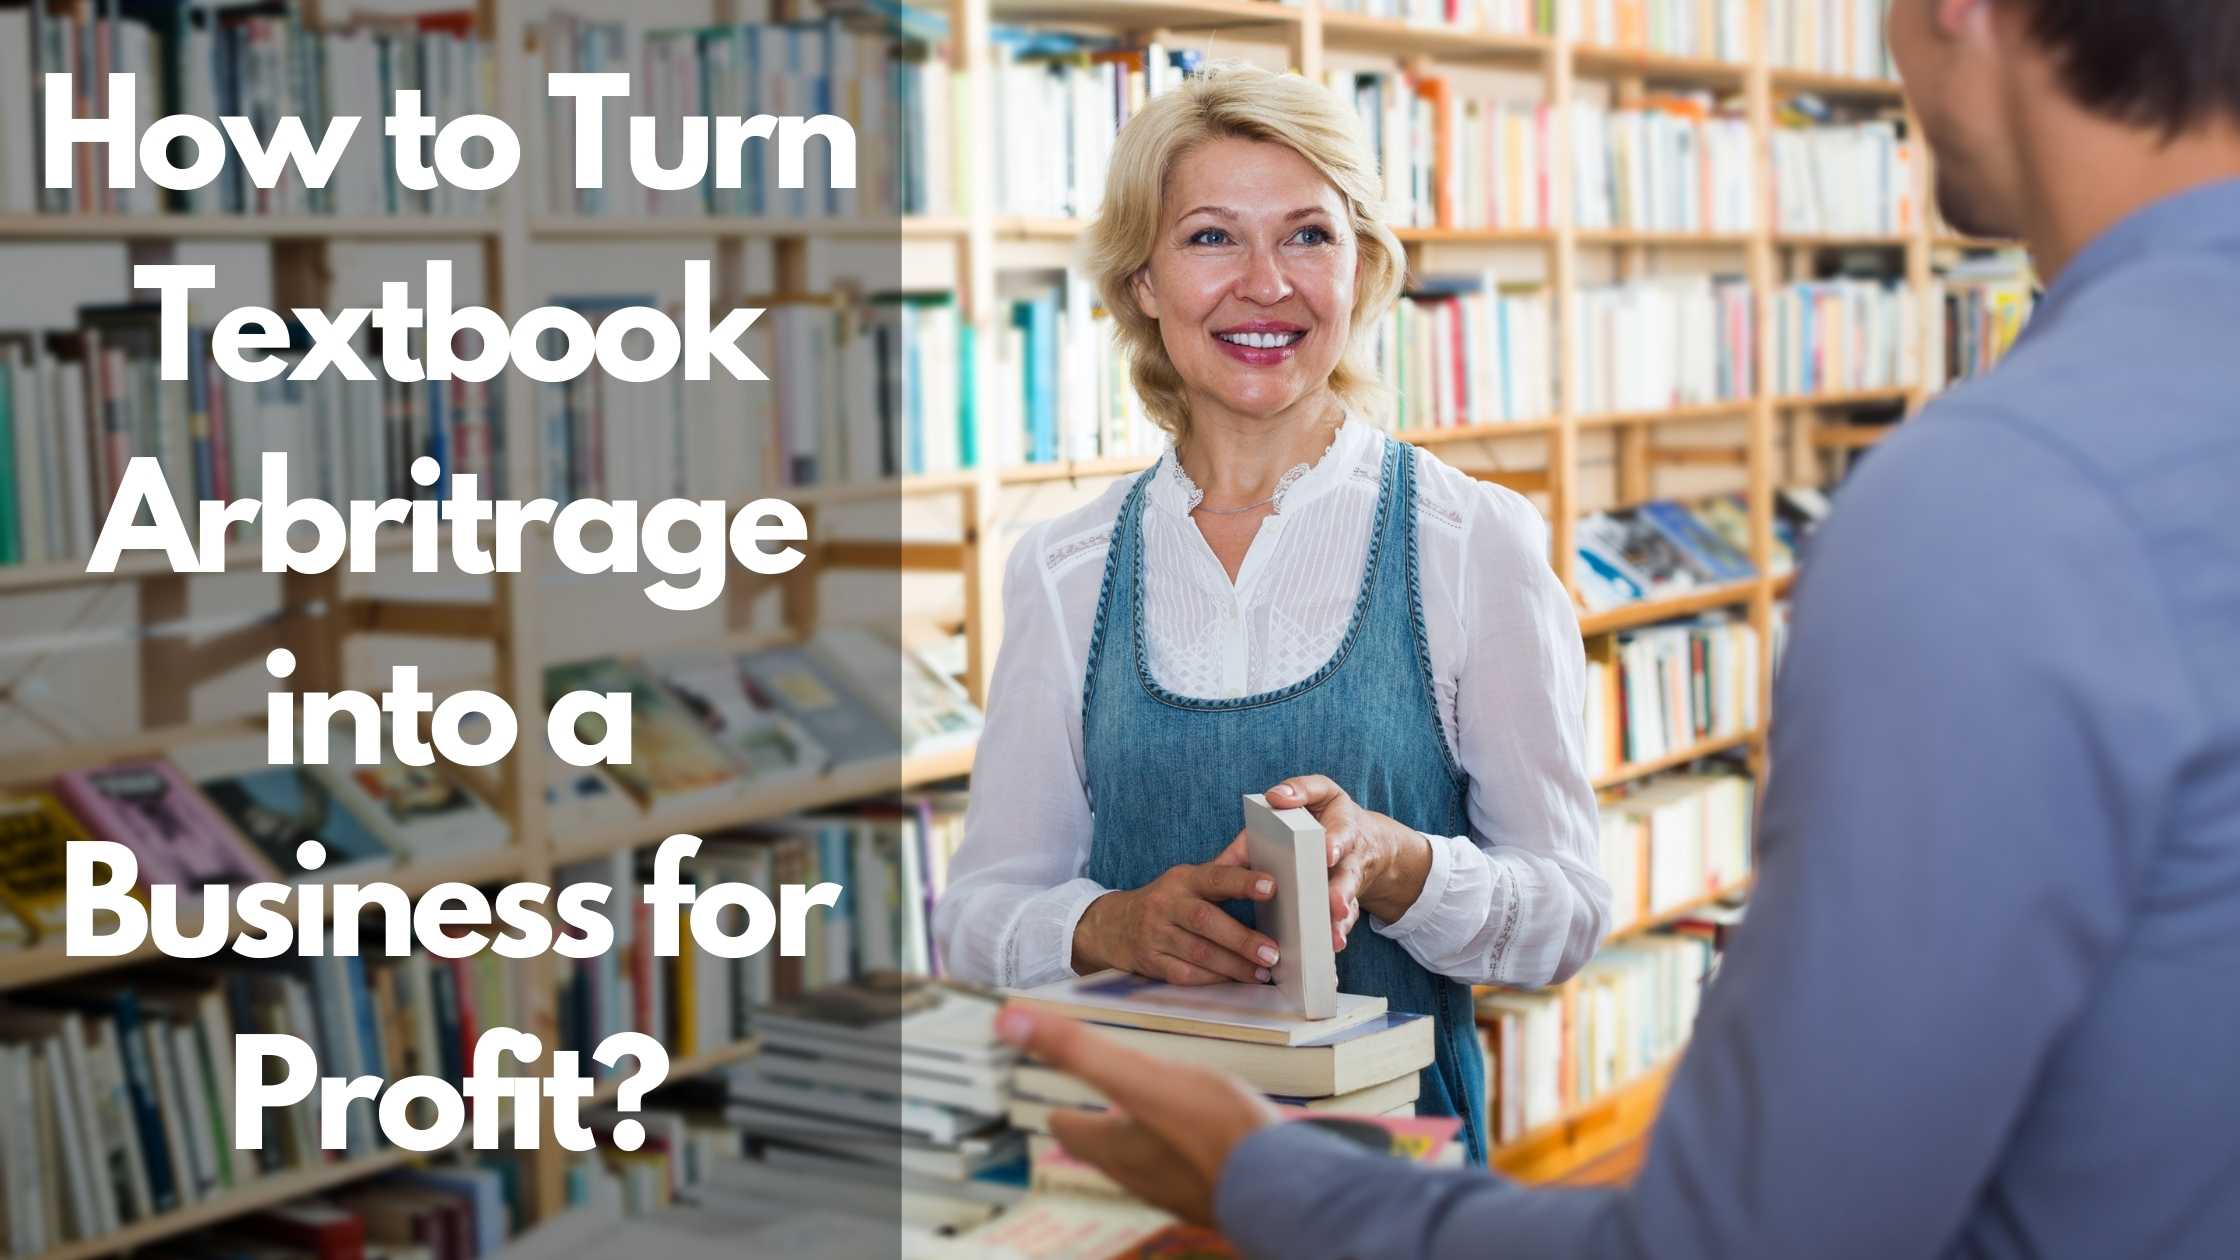 How to turn textbook arbritrage into a business for profit